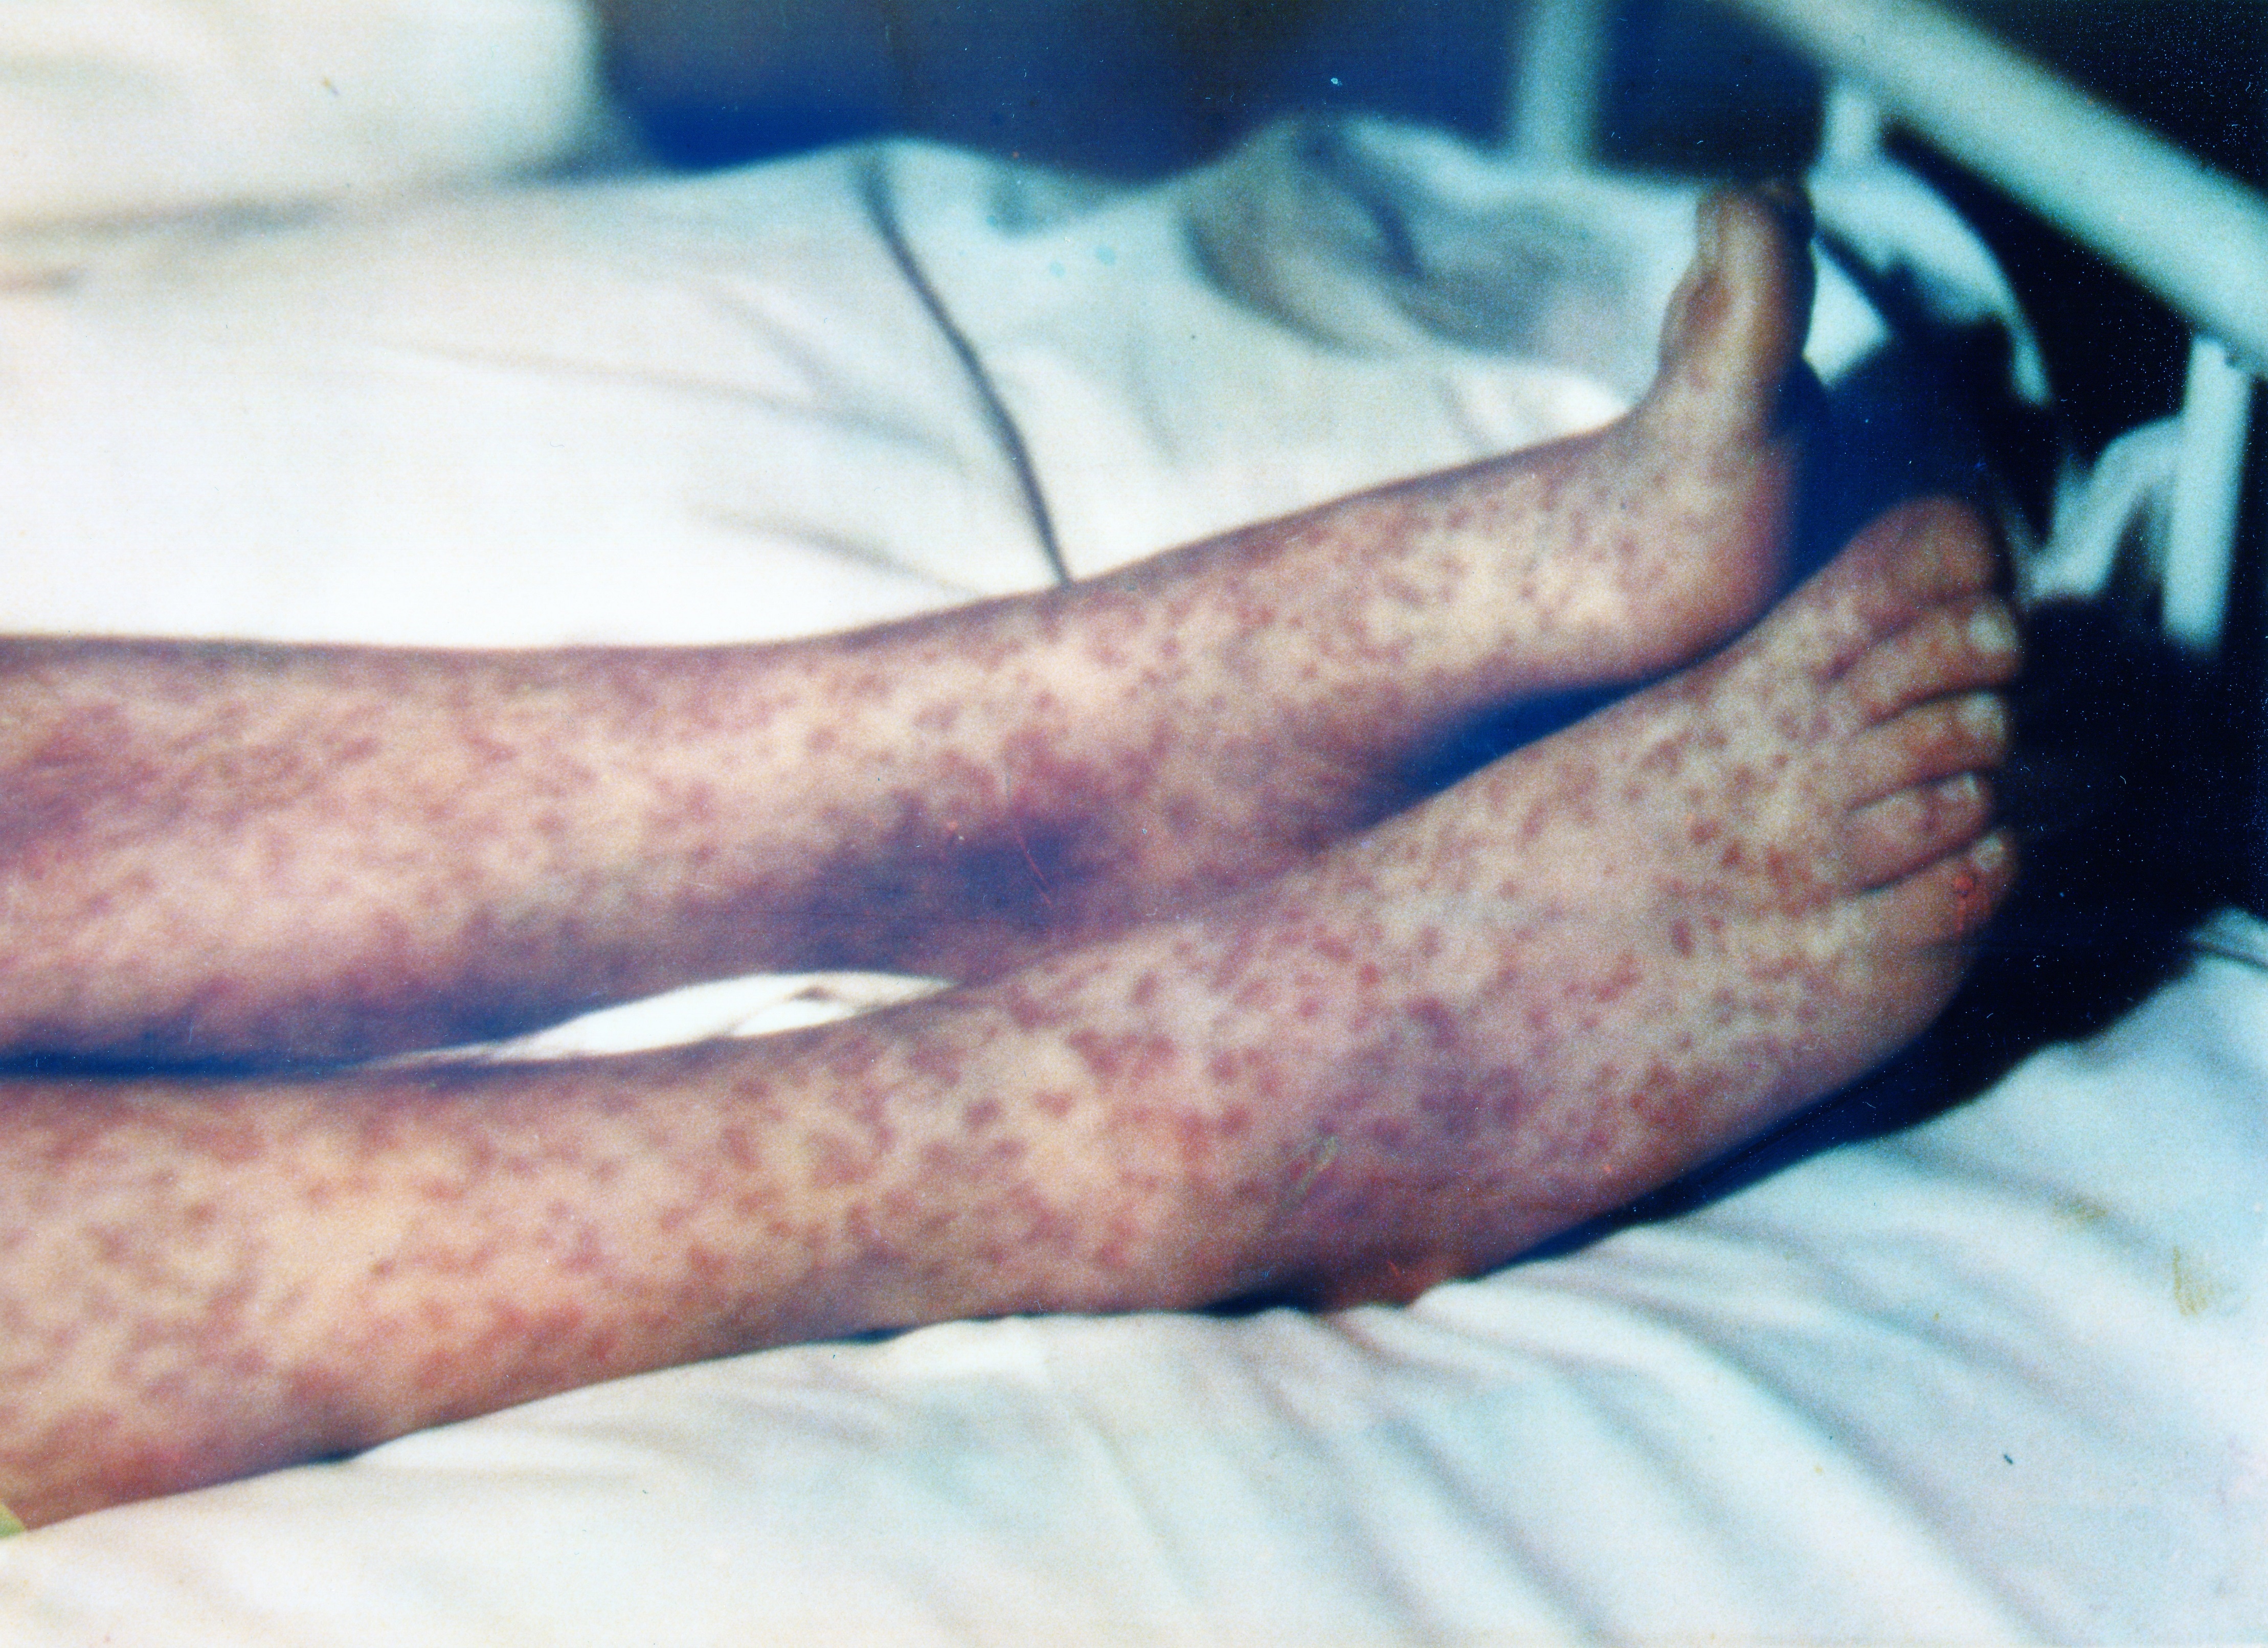 A red rash covers the legs of a person with RMSF